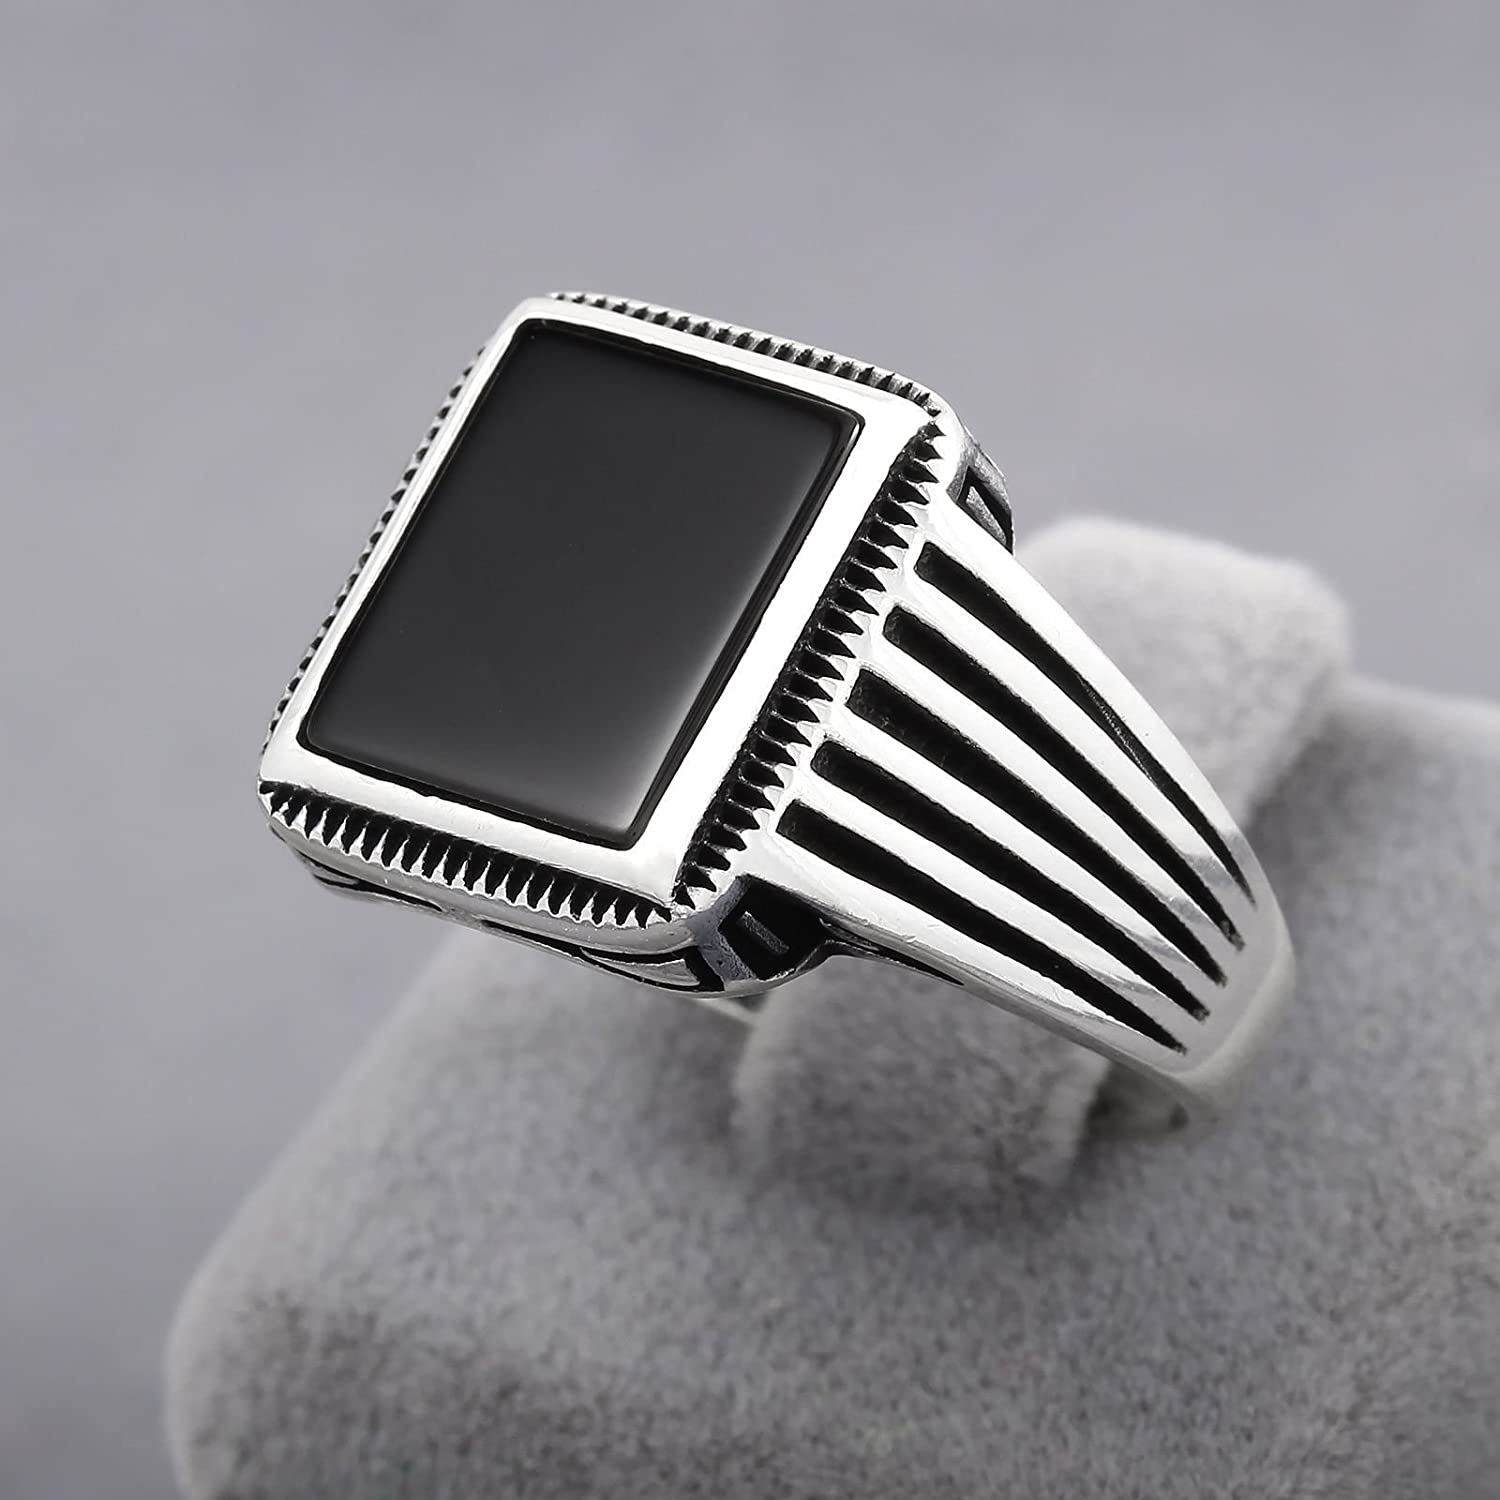 Chimoda Sterling Silver Rings for Men with Onyx Stone , Handmade Mens Jewelry Ring, Striped Motif Mens Ring - Chimoda